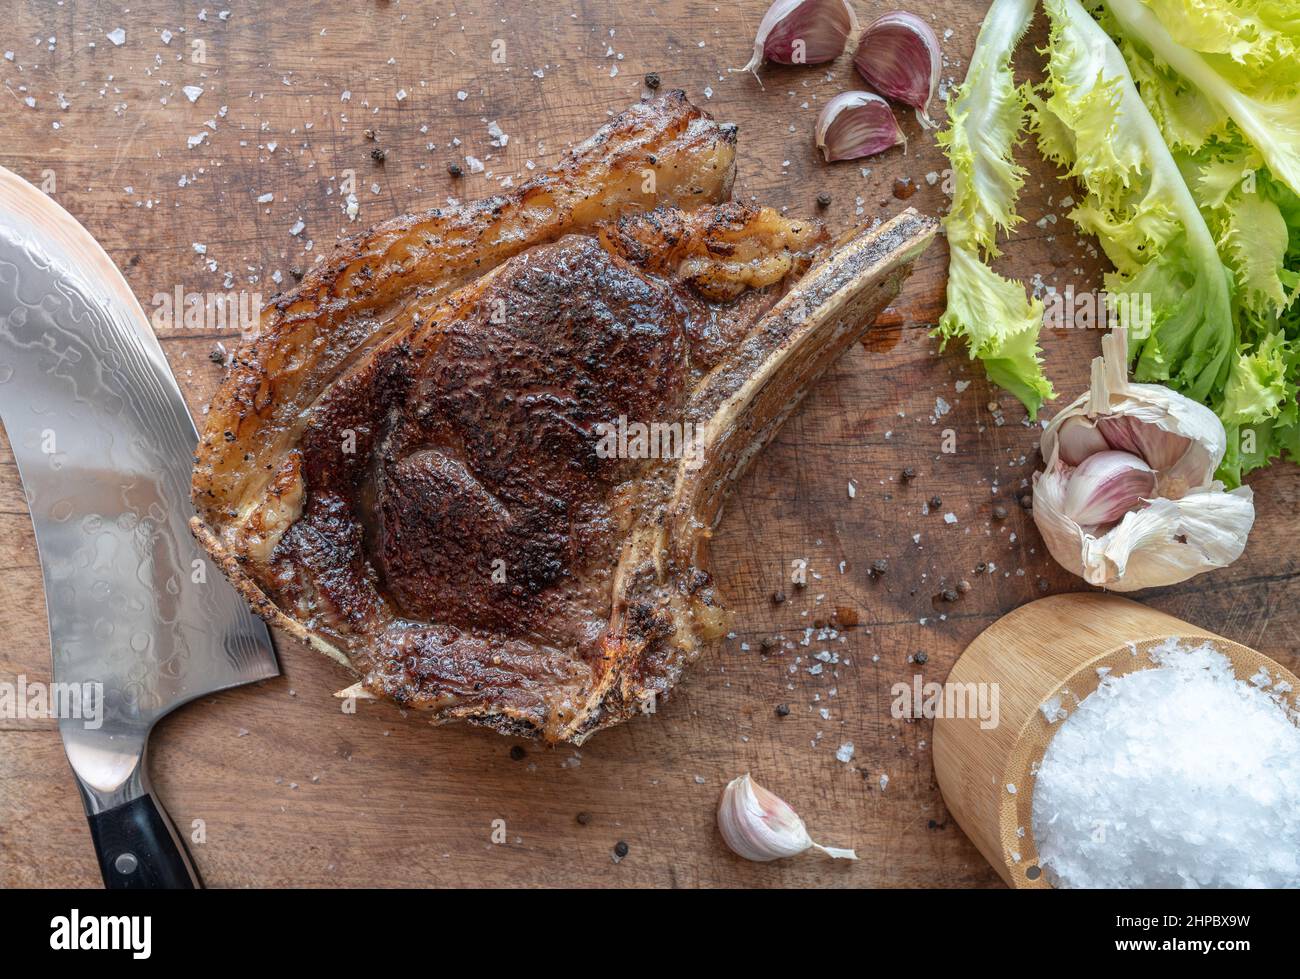 Sous vide cooked medium-rare dry aged rubia gallega beef steak with knife, sea salt flakes, garlic, pepper and salad on a wooden board Stock Photo